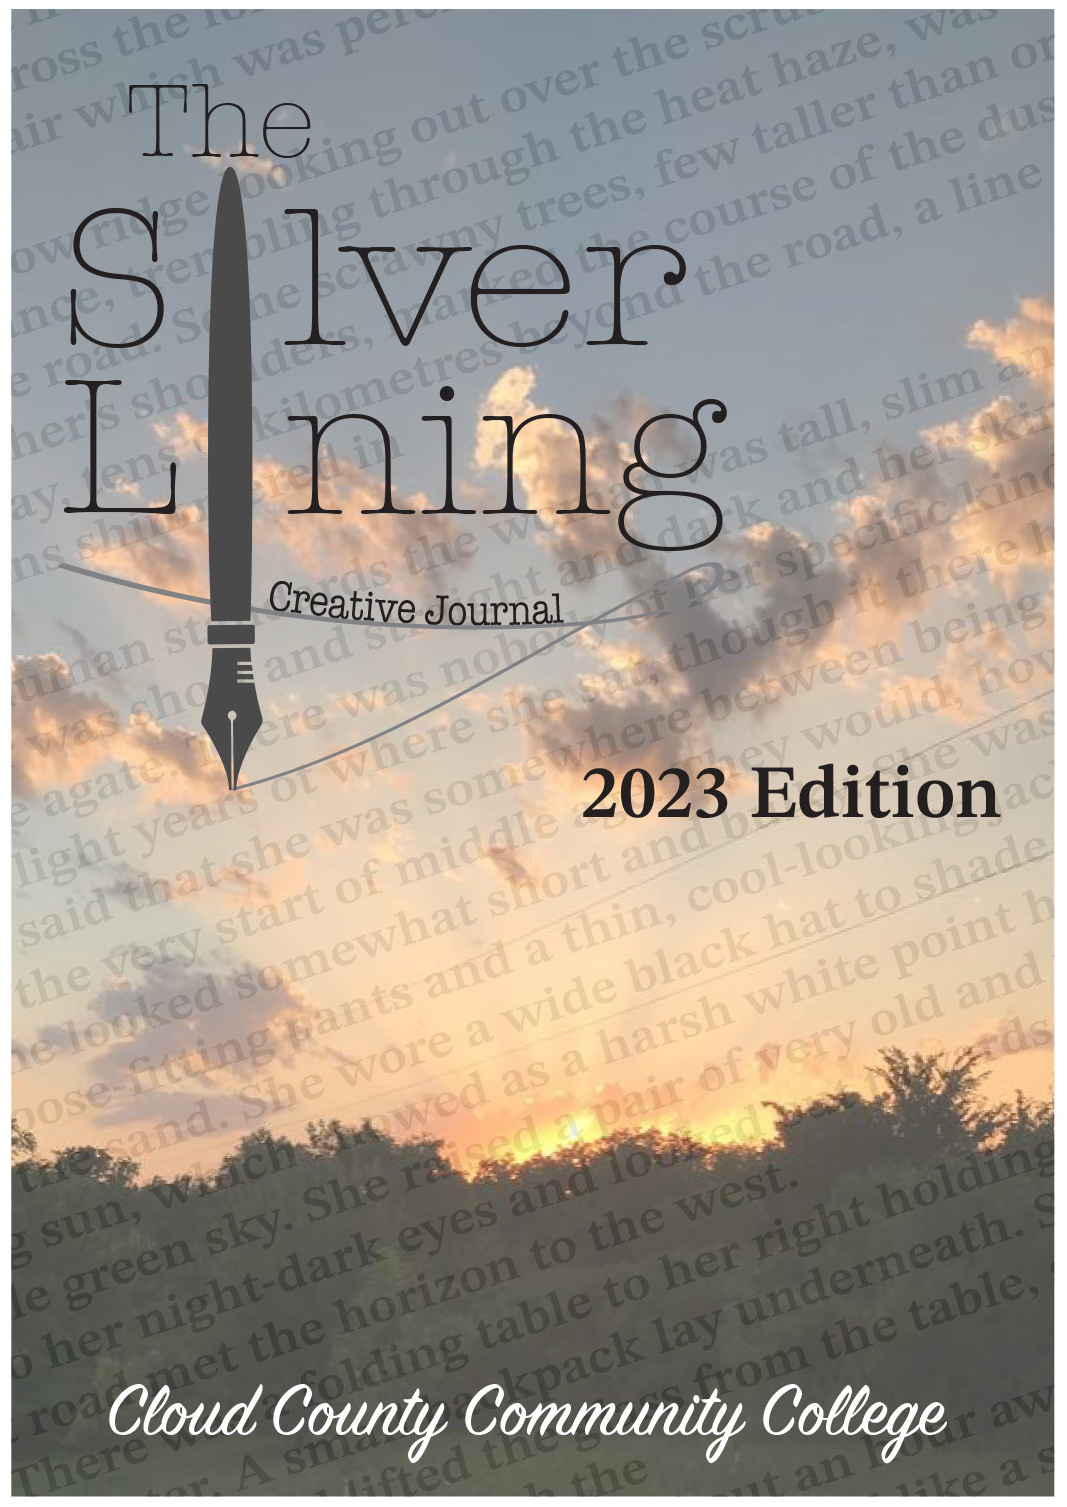 The 2023 Silver Lining cover.